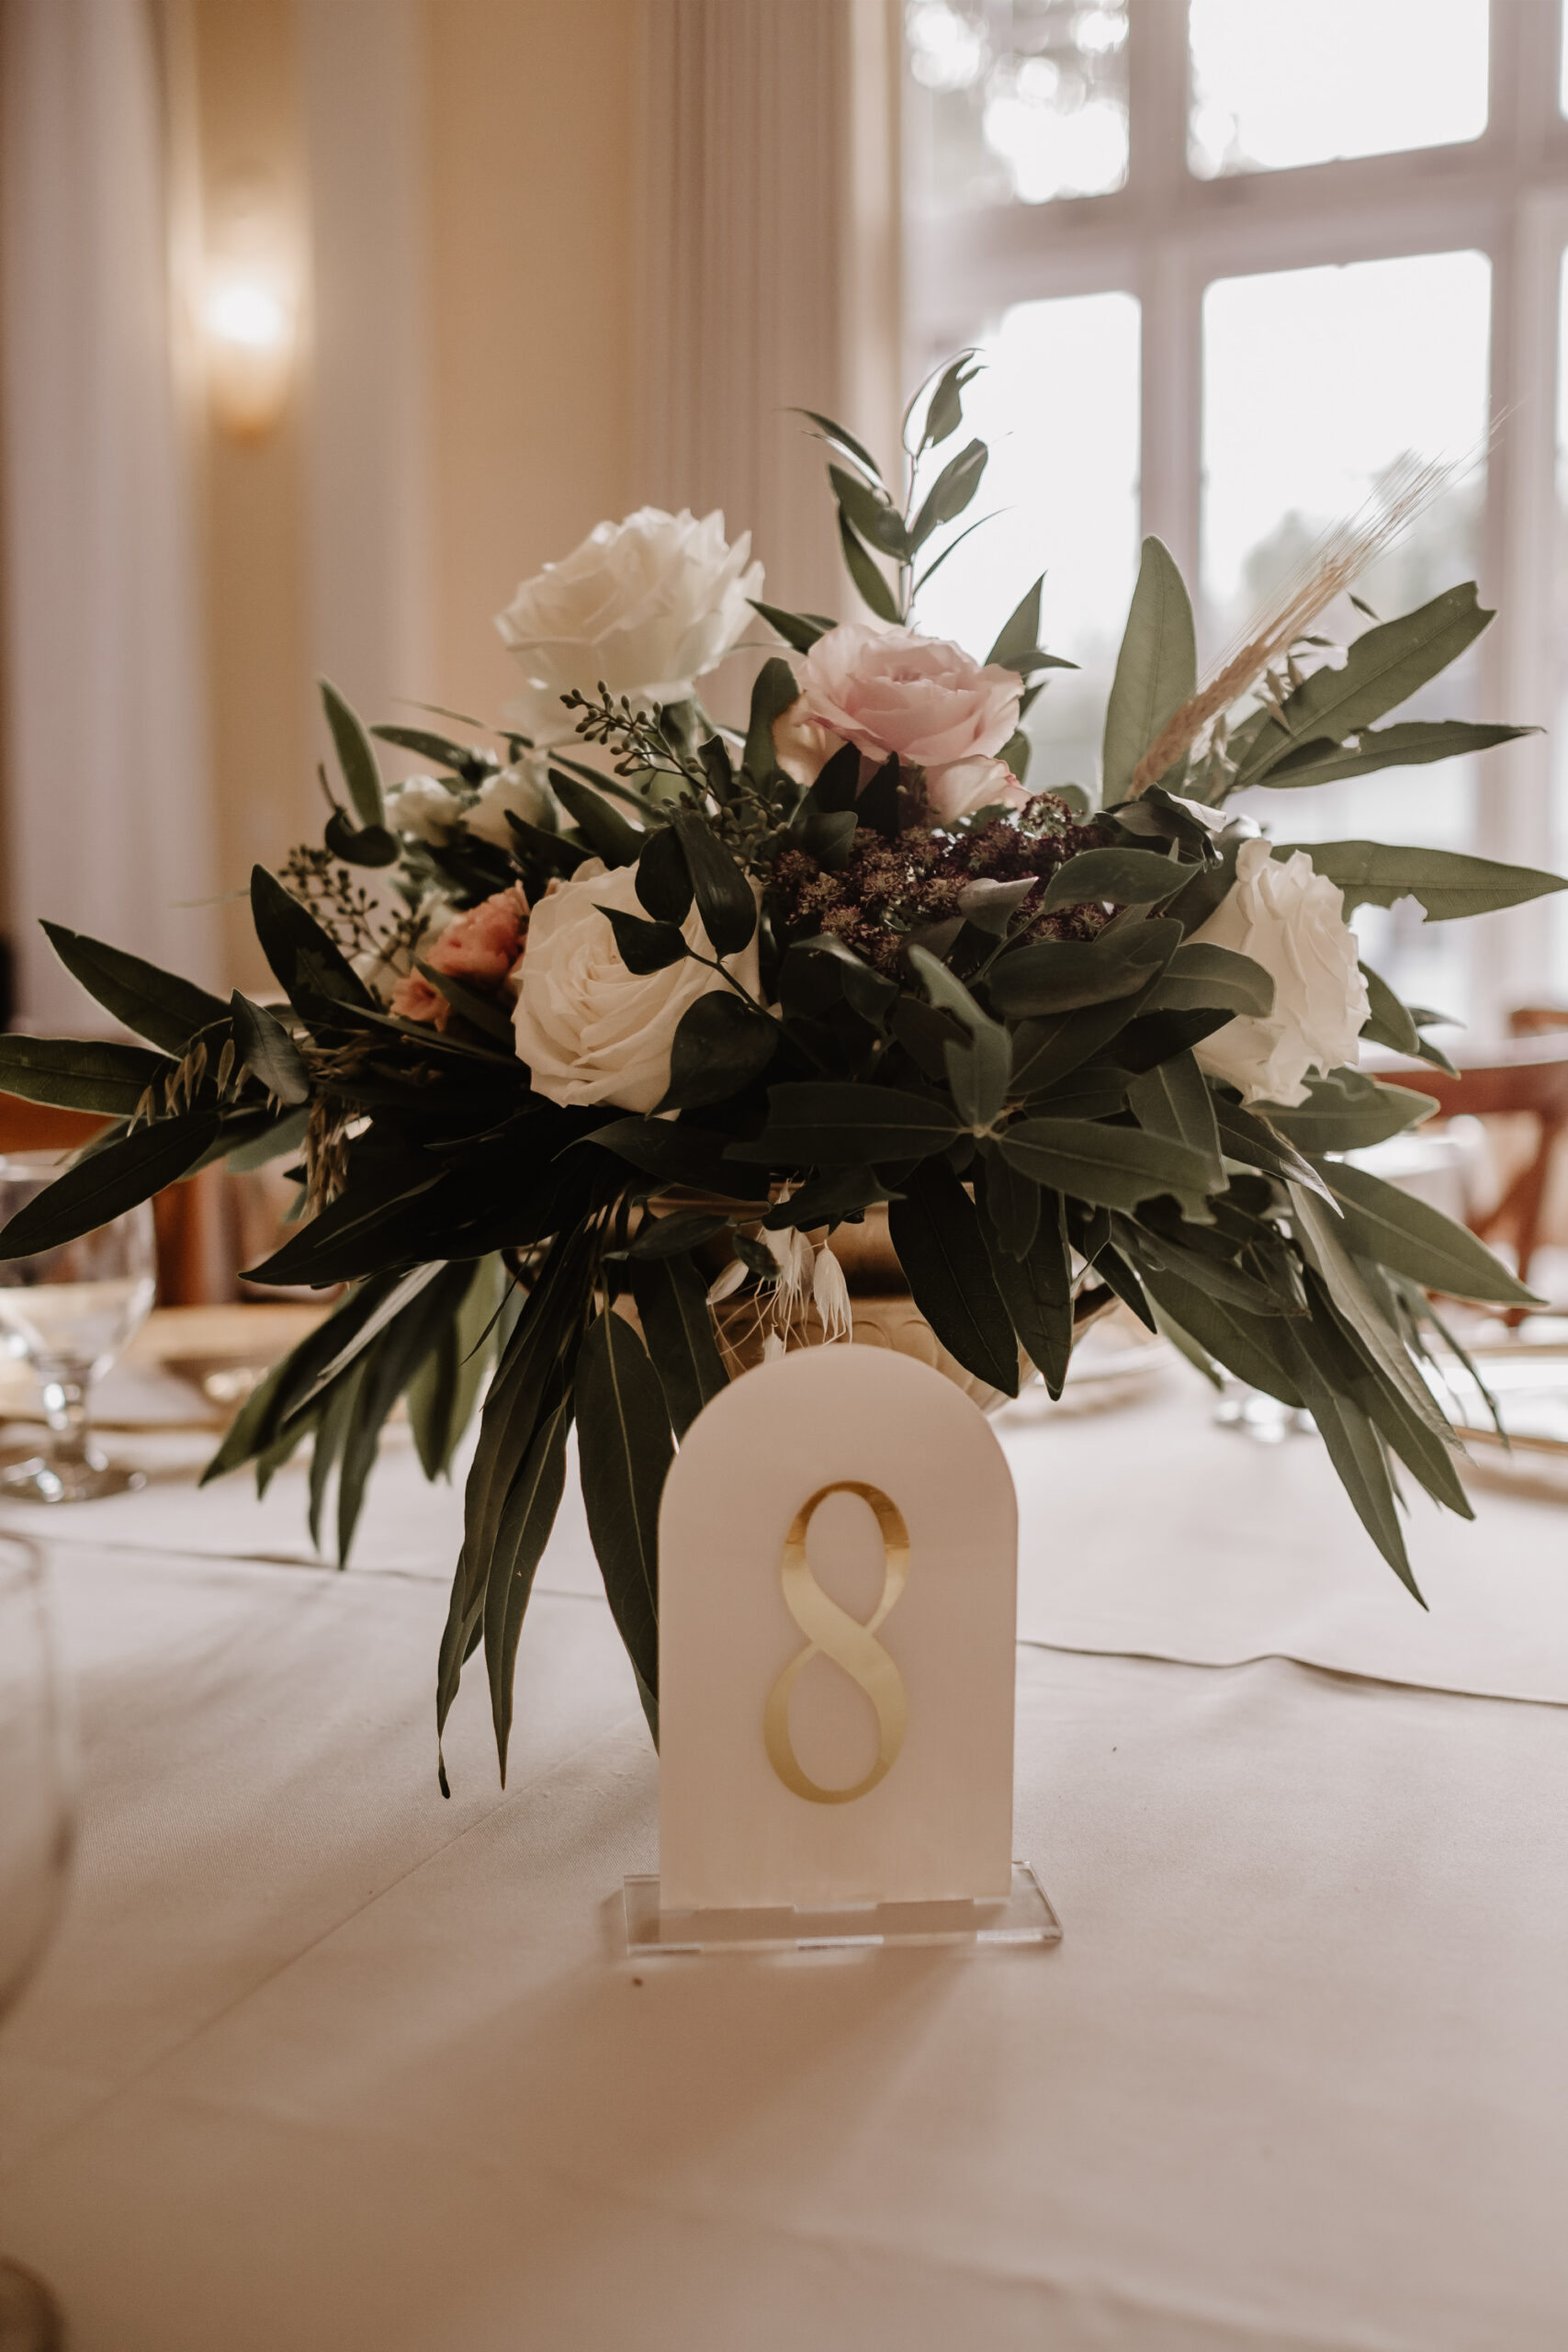 Neutral Boho Modern Wedding Reception Decor, Low Floral Centerpiece, Greenery with White and Blush Pink Roses, Acrylic White and Gold Table Number Signage | Tampa Bay Wedding Planner Taylored Affairs